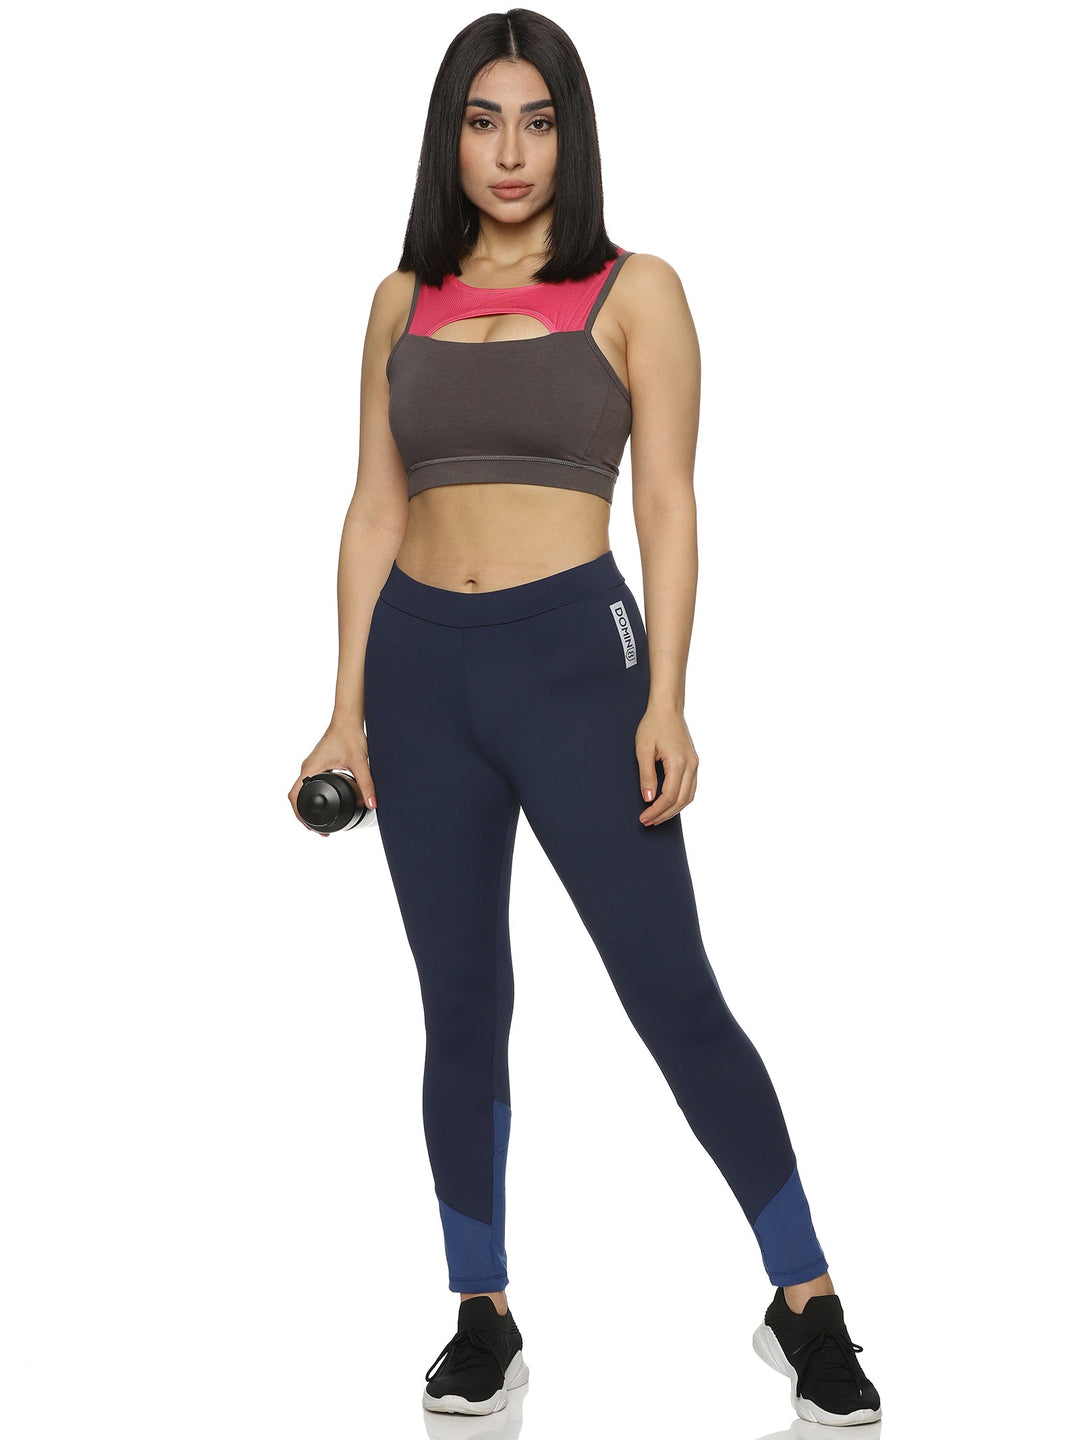 Women's Slim-fit Blue Training Tights with Elasticated waist.